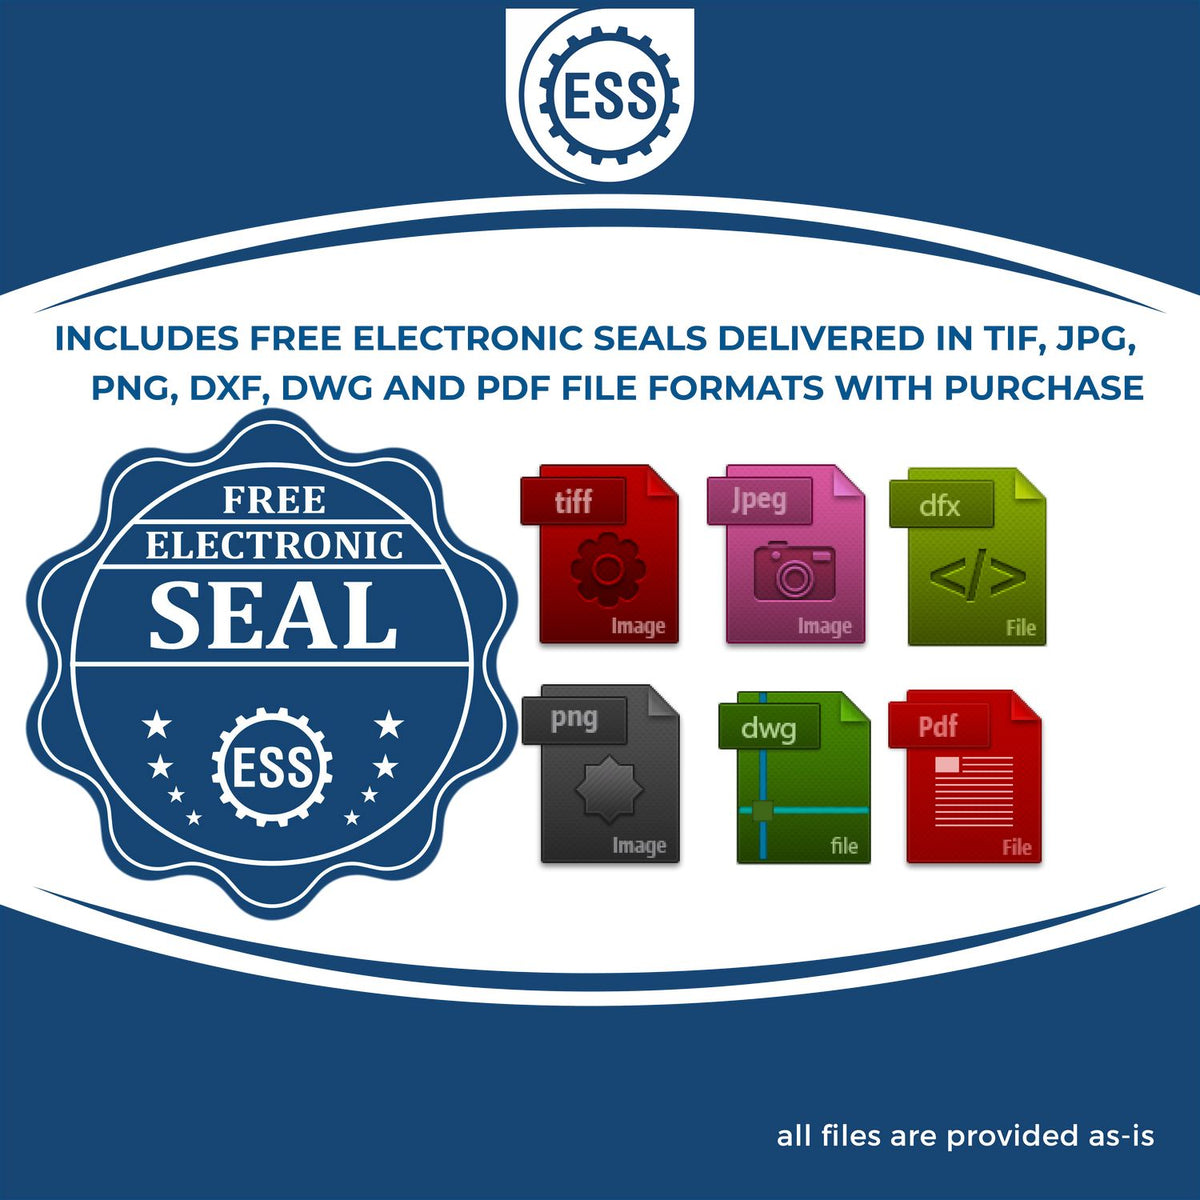 An infographic for the free electronic seal for the Gift Georgia Landscape Architect Seal illustrating the different file type icons such as DXF, DWG, TIF, JPG and PNG.